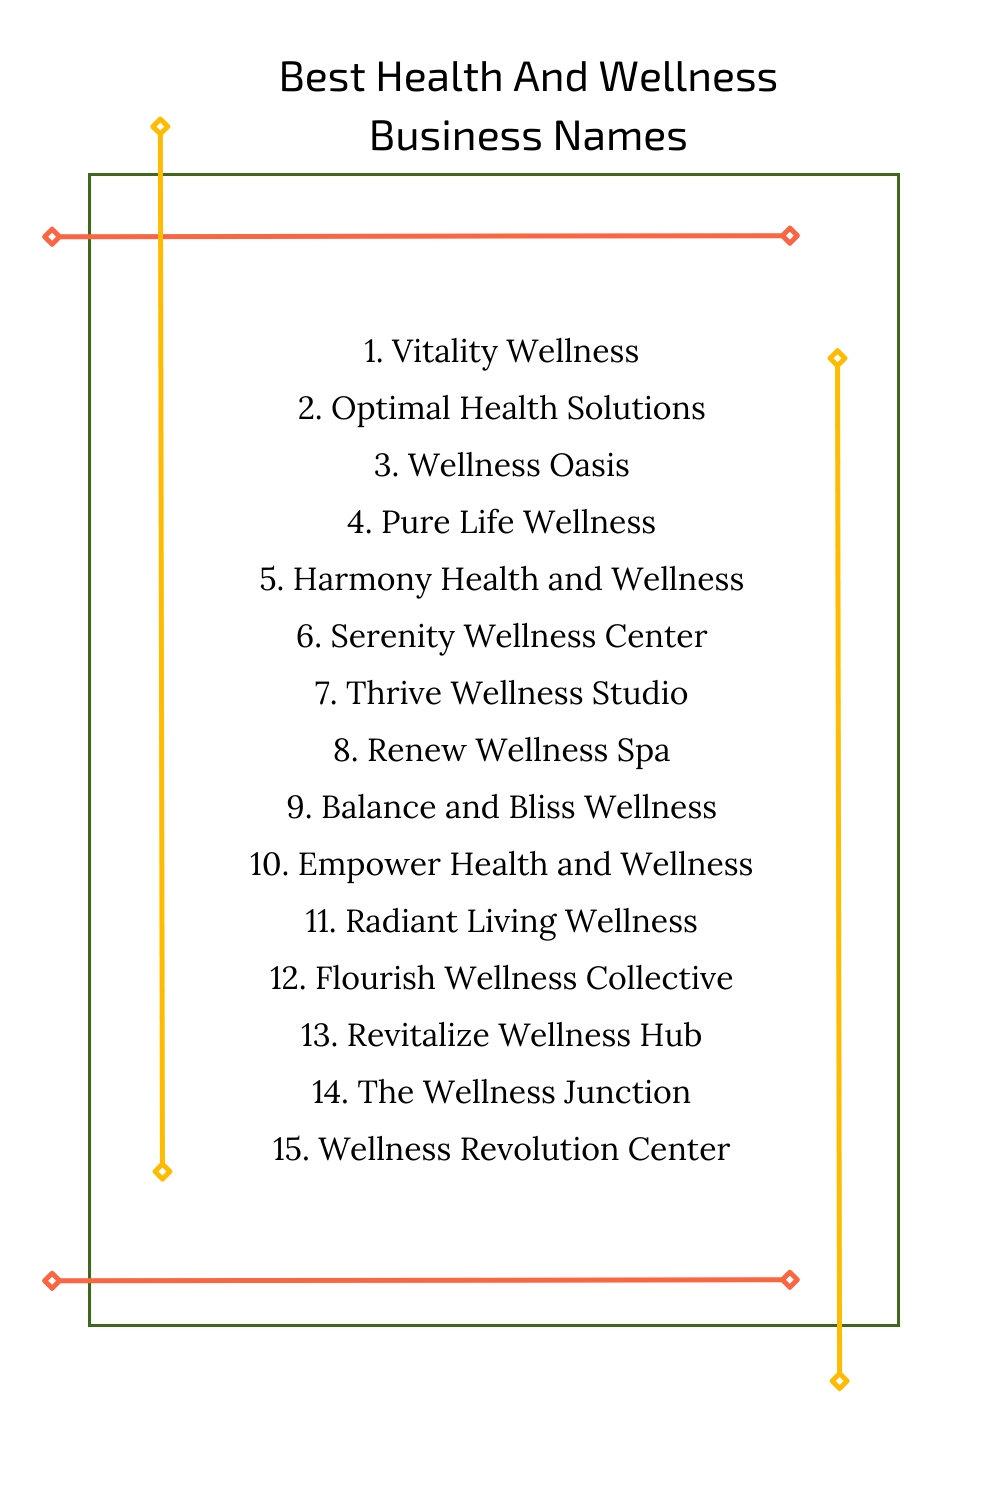 Best Health And Wellness Business Names